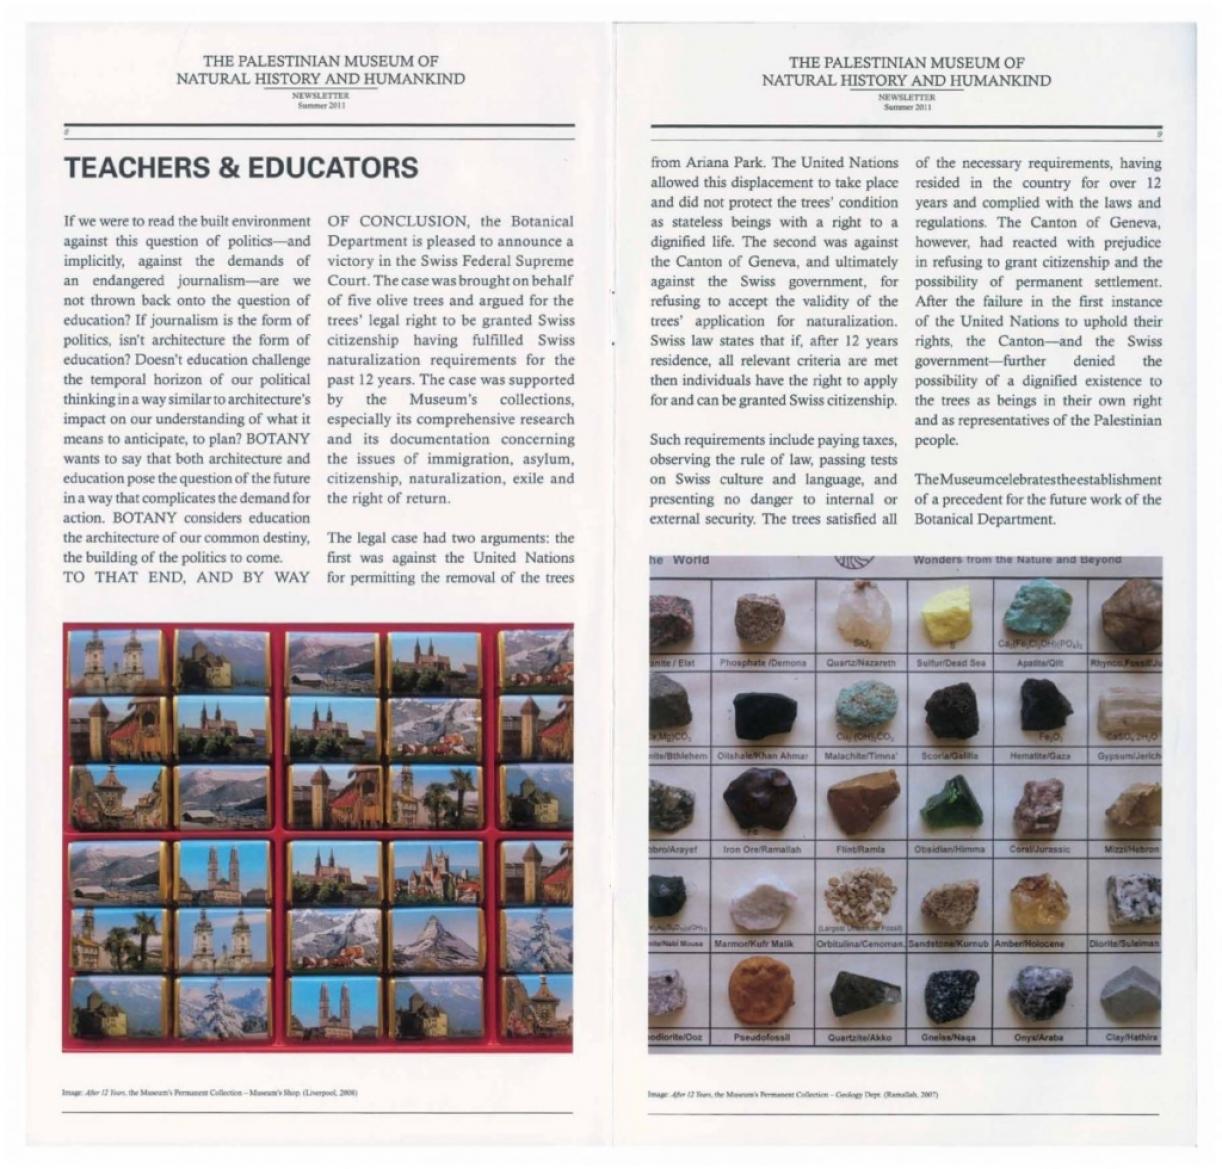 The Palestinian Museum of Natural History and Humankind, Newsletter, Summer 2011